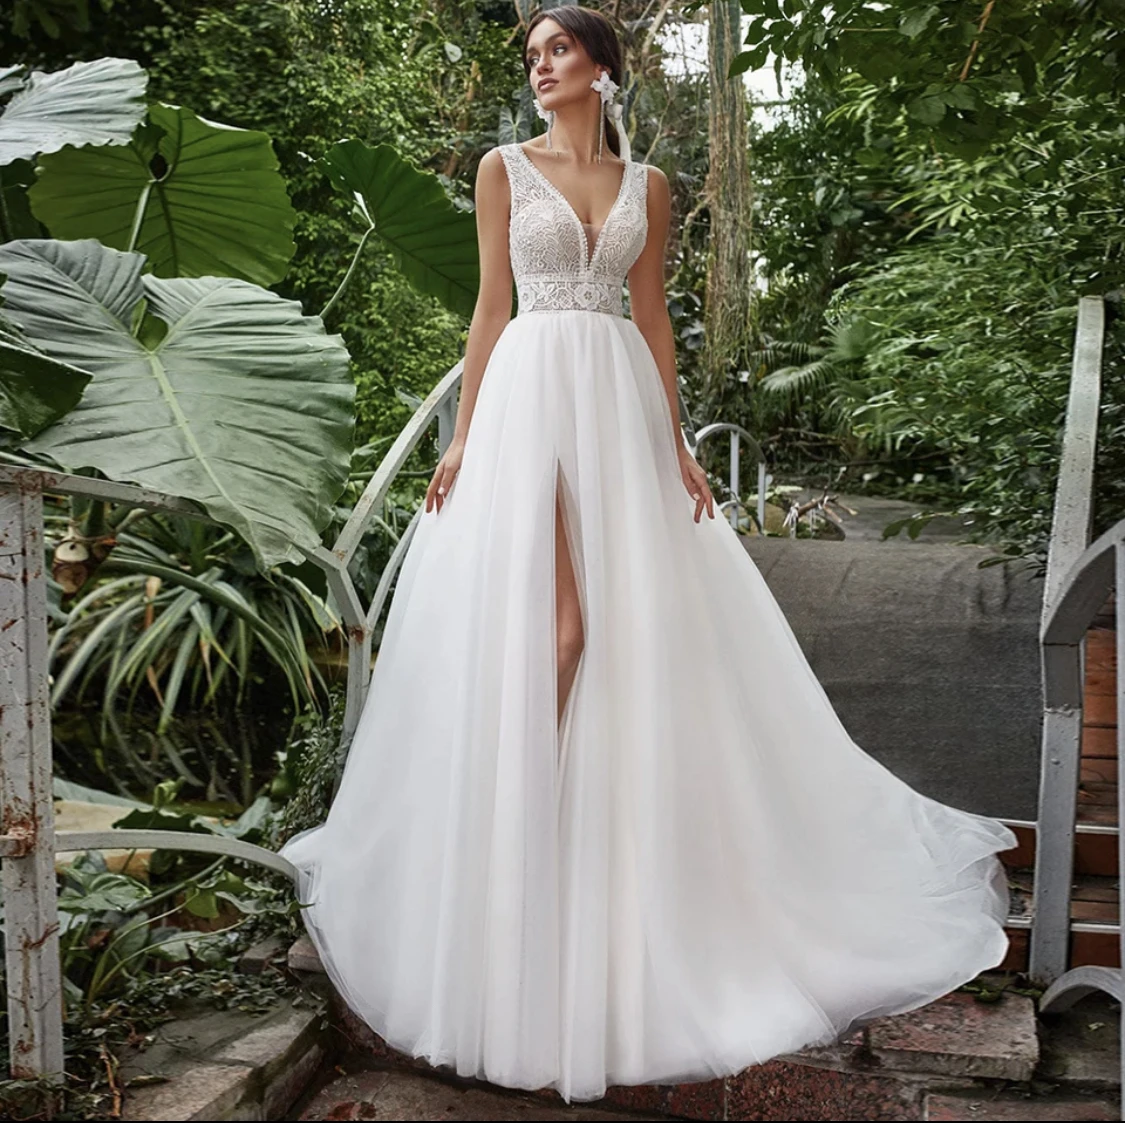 

Charming Wedding Dress 2021 A-Line Sexy Side Slit V-Neck Tank Lace Embroidery Backless Sweep Train Bride Gown Vestidos De Noiva